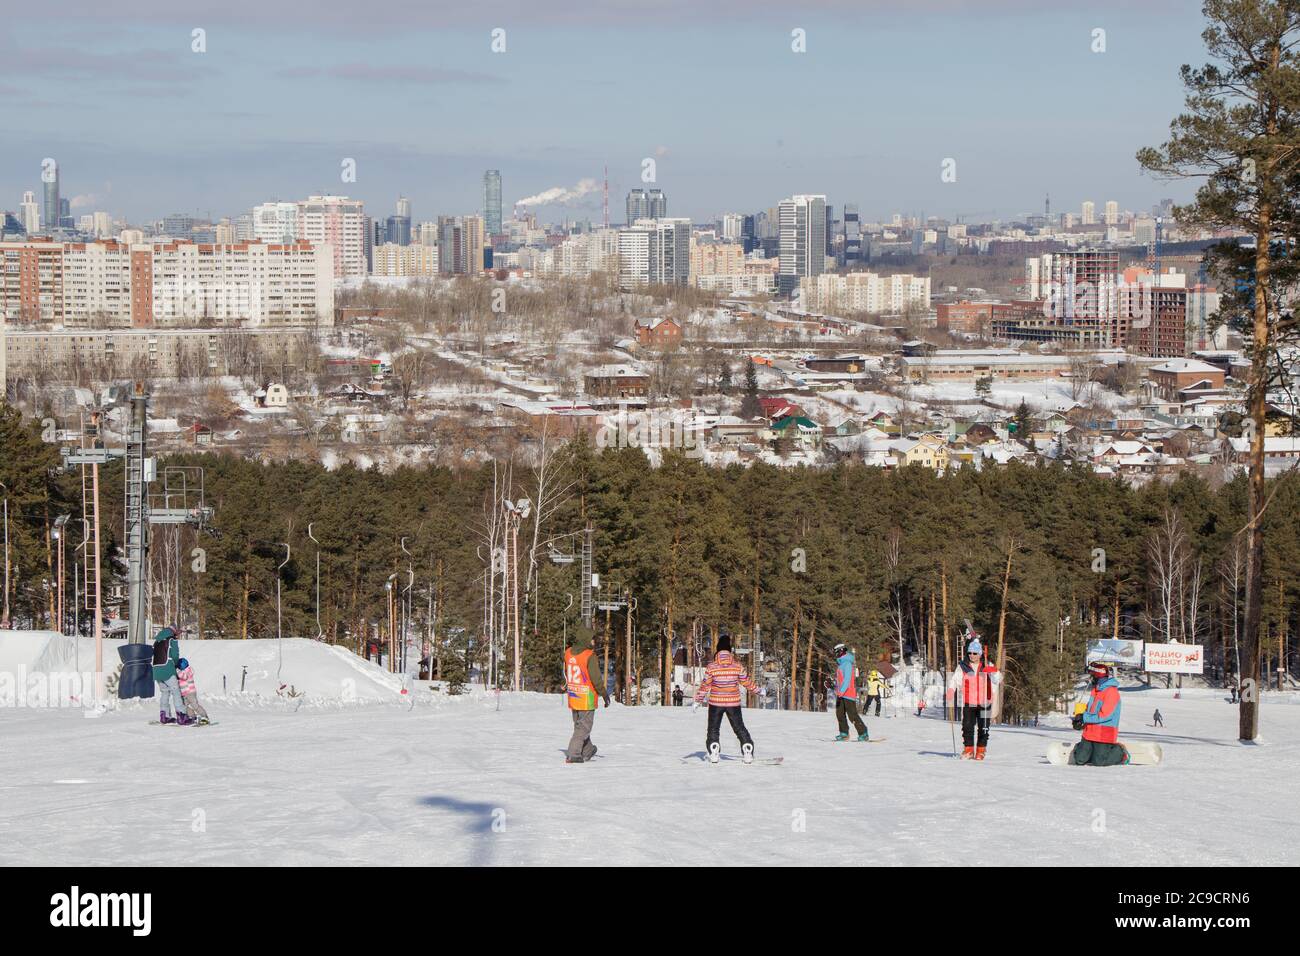 Yekaterinburg, Russia - February 26, 2019. Training slope of sports complex on Uktus Mountain. Instructors teach beginners how to ski or snowboard. In Stock Photo